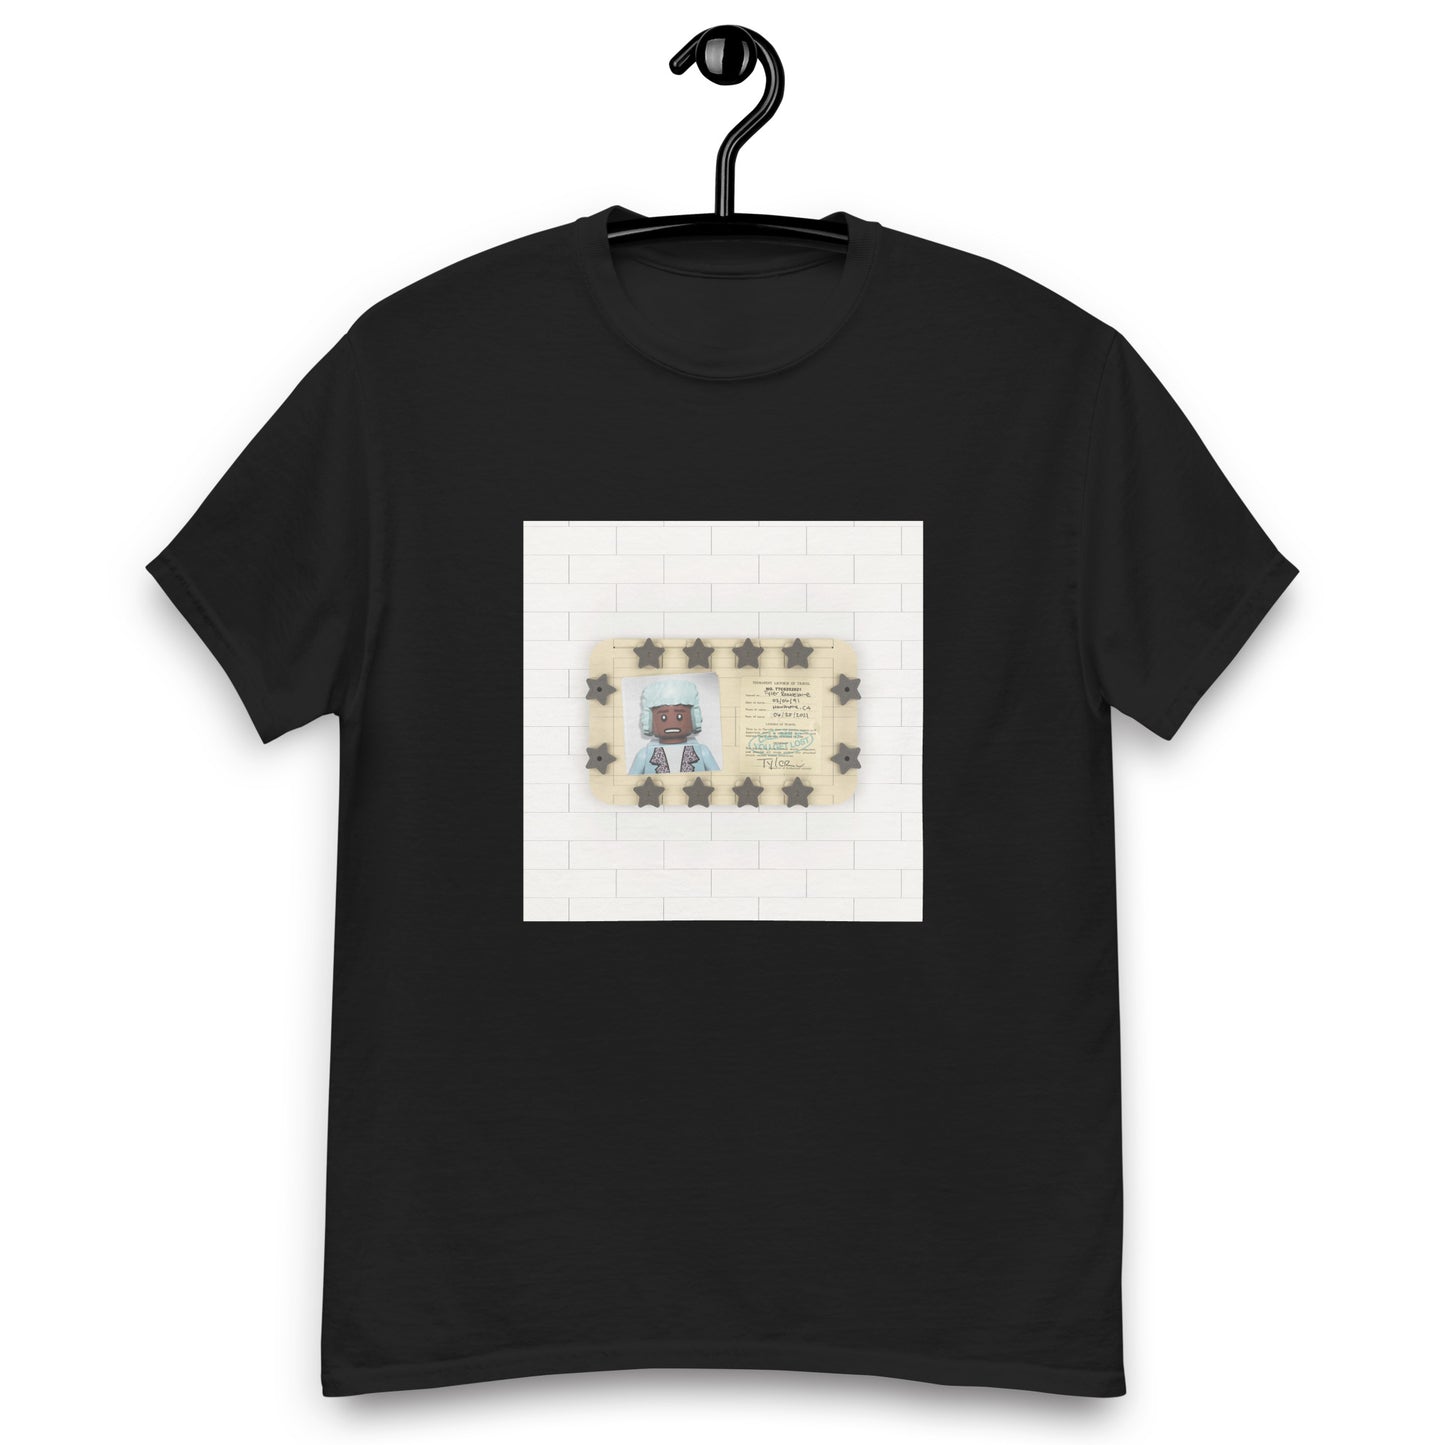 "Tyler, The Creator - Call Me If You Get Lost" Lego Parody Tshirt